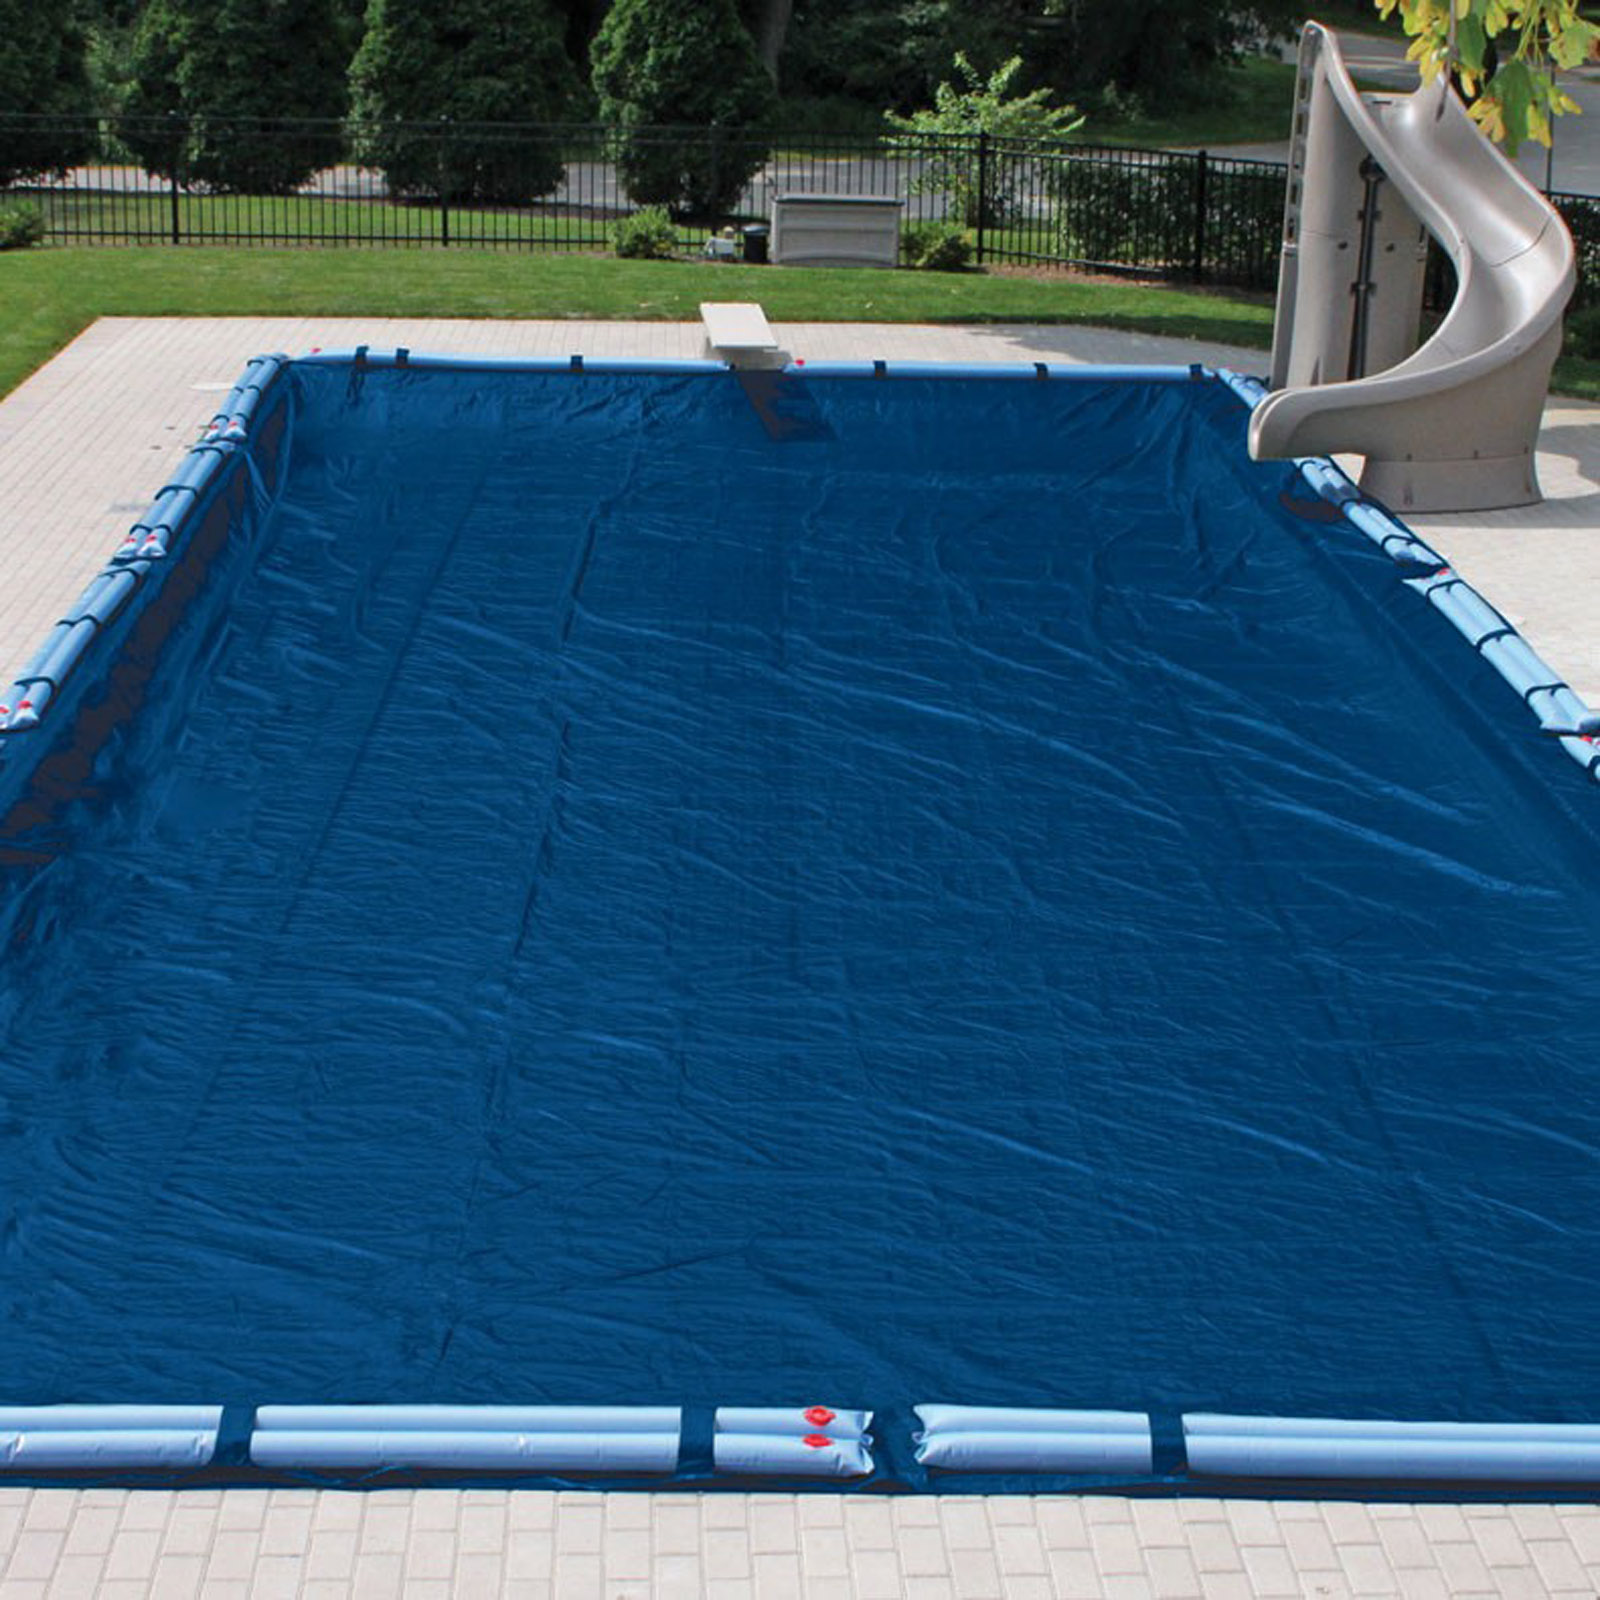 Durango In Ground Pool Cover 12x12 Weave 16X32 Rectangle Shop Your Way Online Shopping